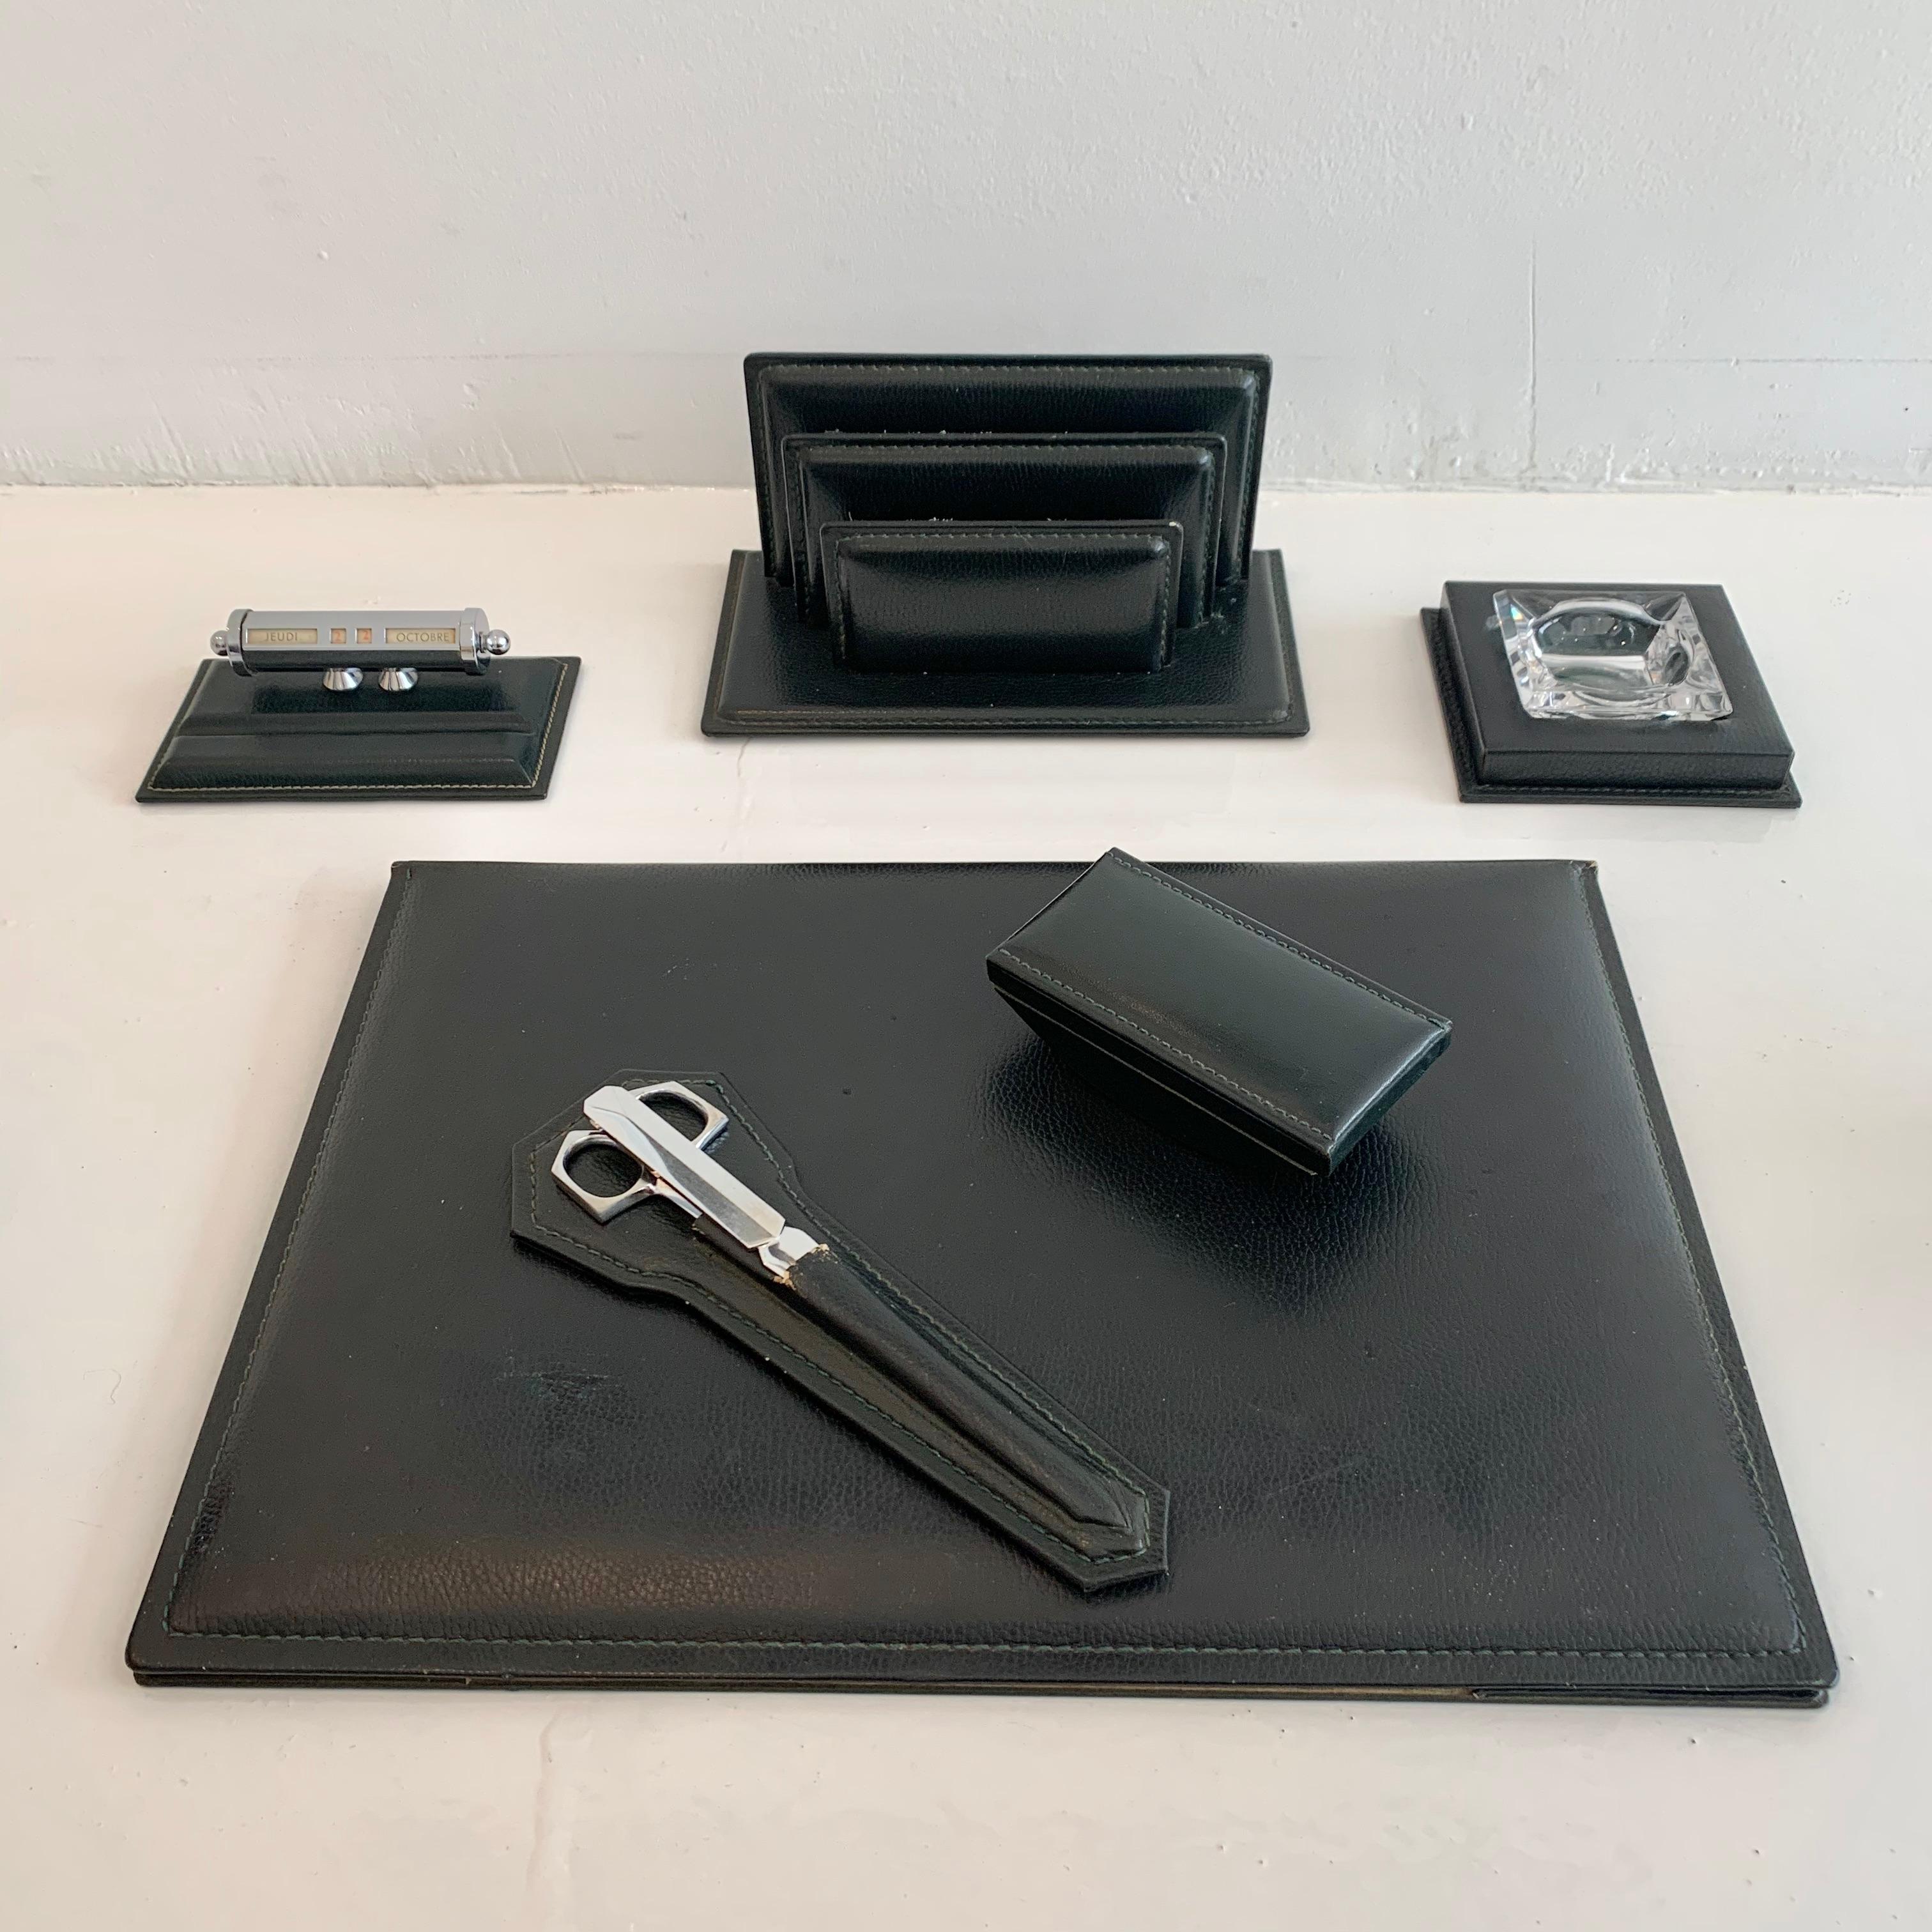 Fantastic 6-piece French leather desk set by Le Tanneur. All pieces wrapped in dark green leather. Desk set includes: desk pad, ink blotter, mail holder, ashtray, adjustable calendar, chrome scissors and letter opener. Good vintage condition. Super